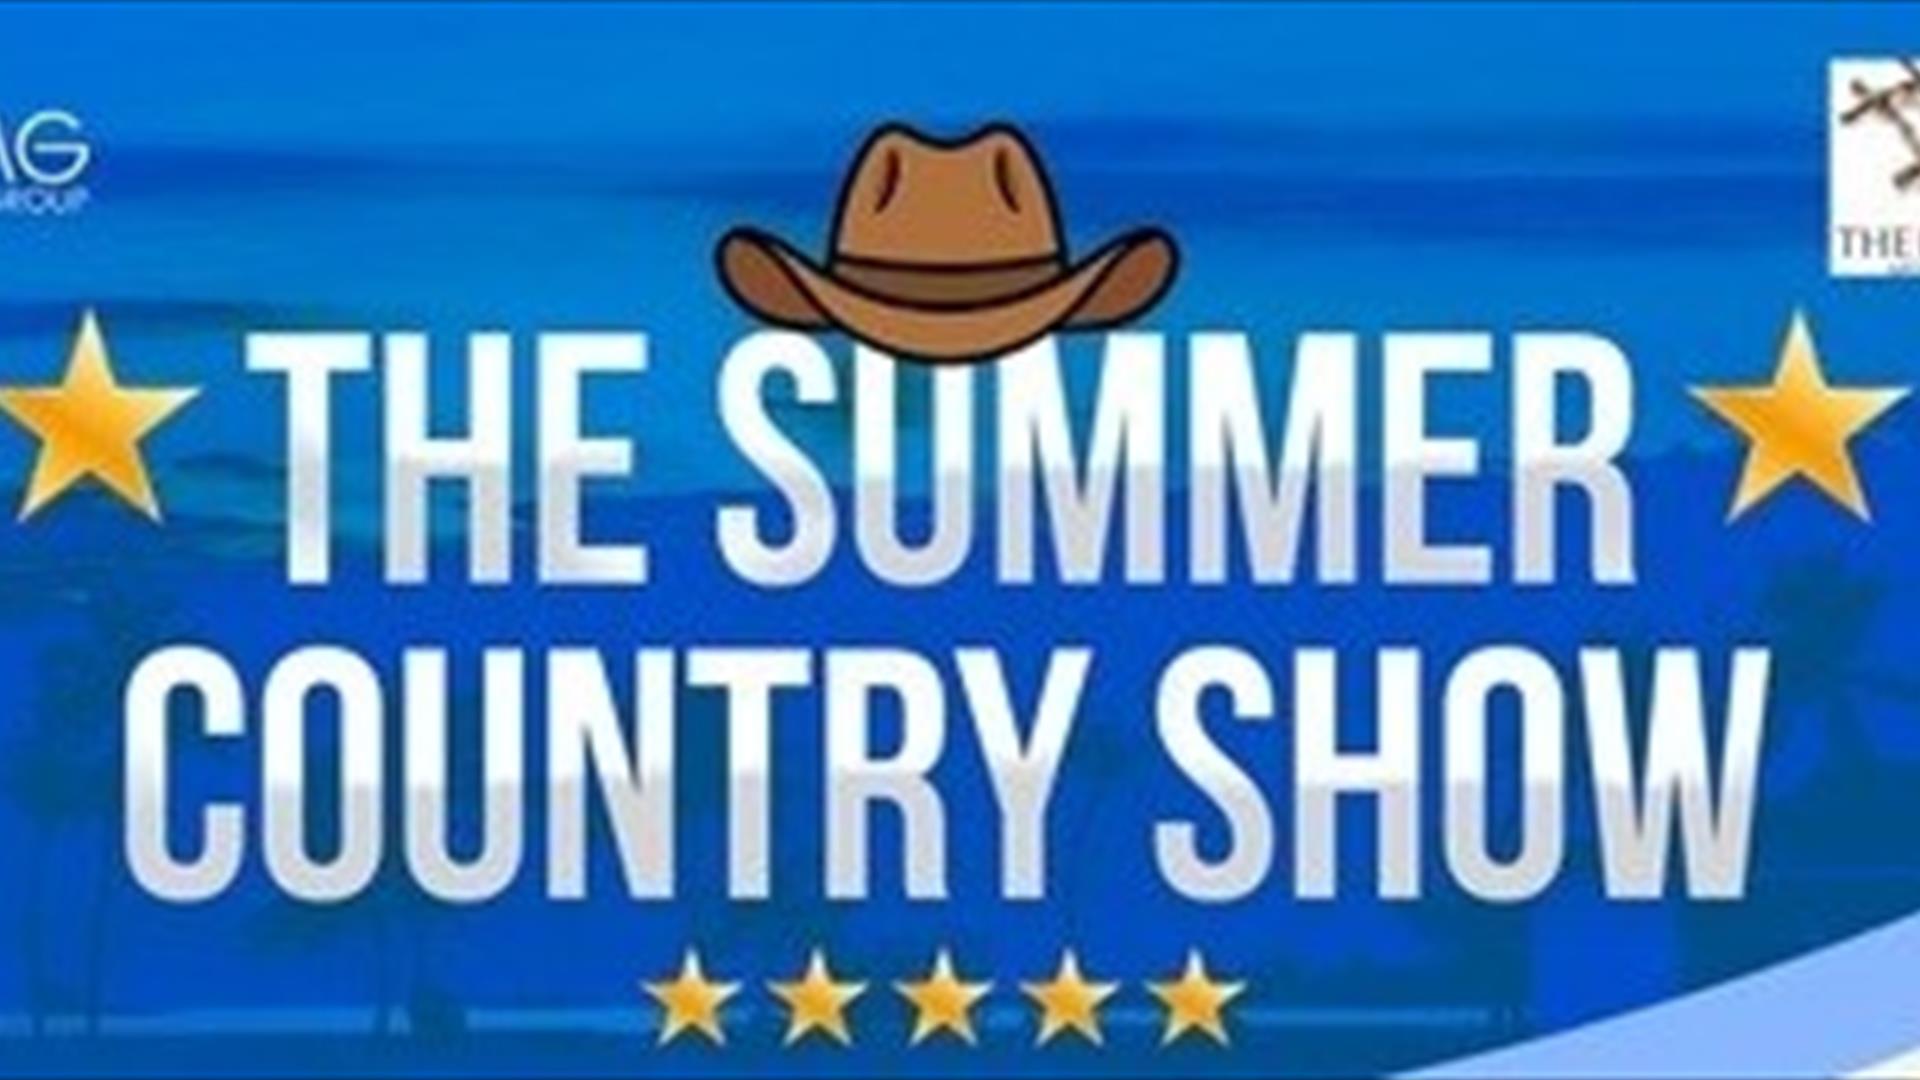 THE SUMMER COUNTRY SHOW